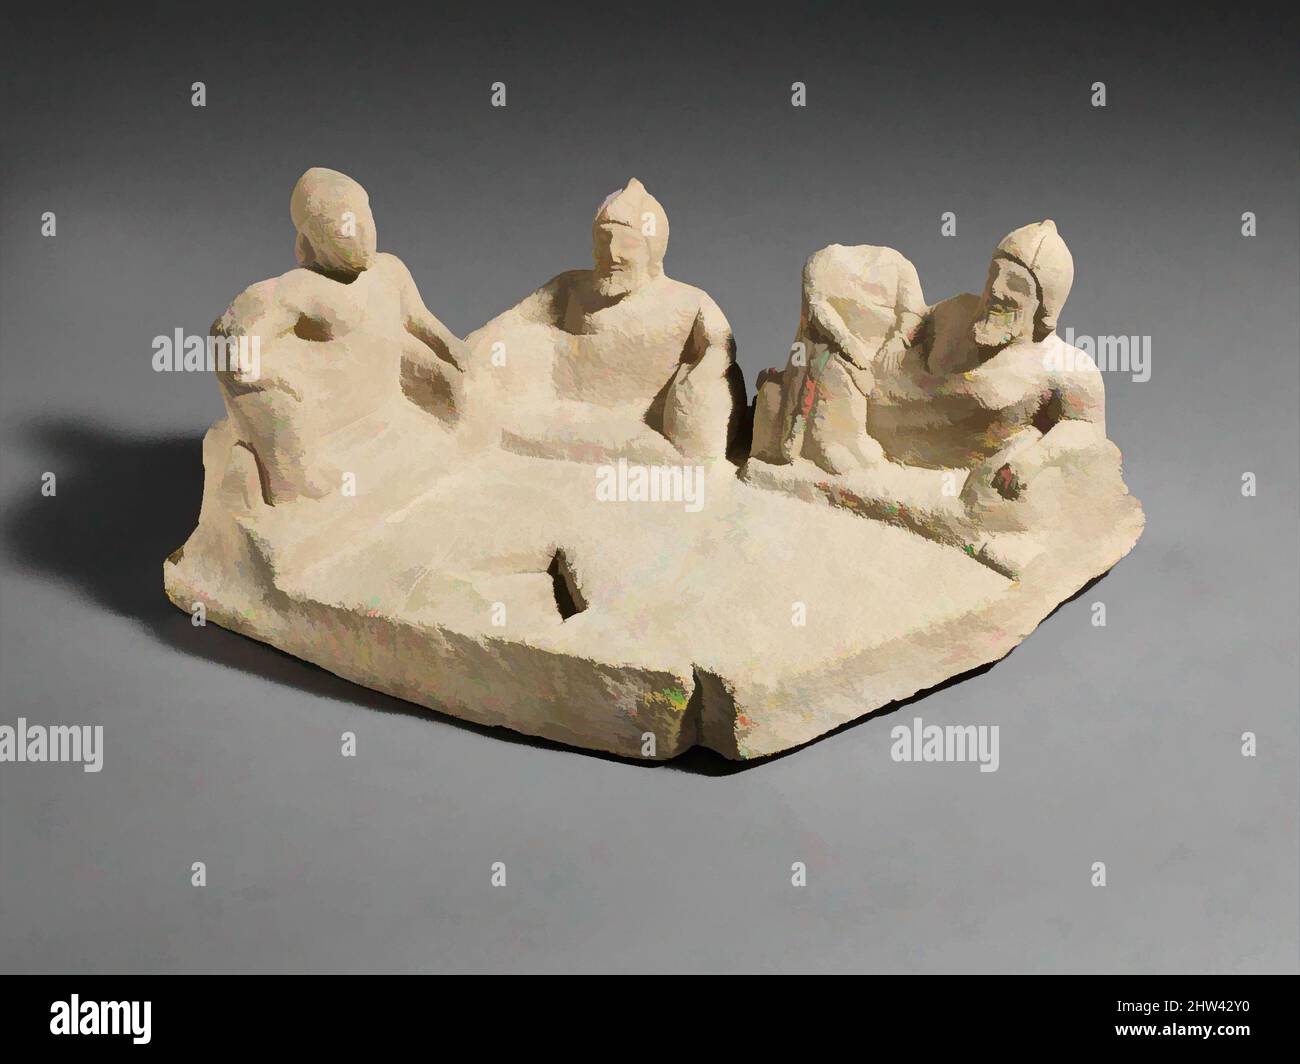 Art inspired by Limestone group: banquet, Archaic, end of the 6th century B.C., Cypriot, Limestone, H.: 6 7/8 x 17 1/2 x 11 1/4 in. (17.5 x 44.5 x 28.6 cm), Stone Sculpture, Five figures are disposed around the edge of an irregular plinth. They face inward; a cutting may have held an, Classic works modernized by Artotop with a splash of modernity. Shapes, color and value, eye-catching visual impact on art. Emotions through freedom of artworks in a contemporary way. A timeless message pursuing a wildly creative new direction. Artists turning to the digital medium and creating the Artotop NFT Stock Photo